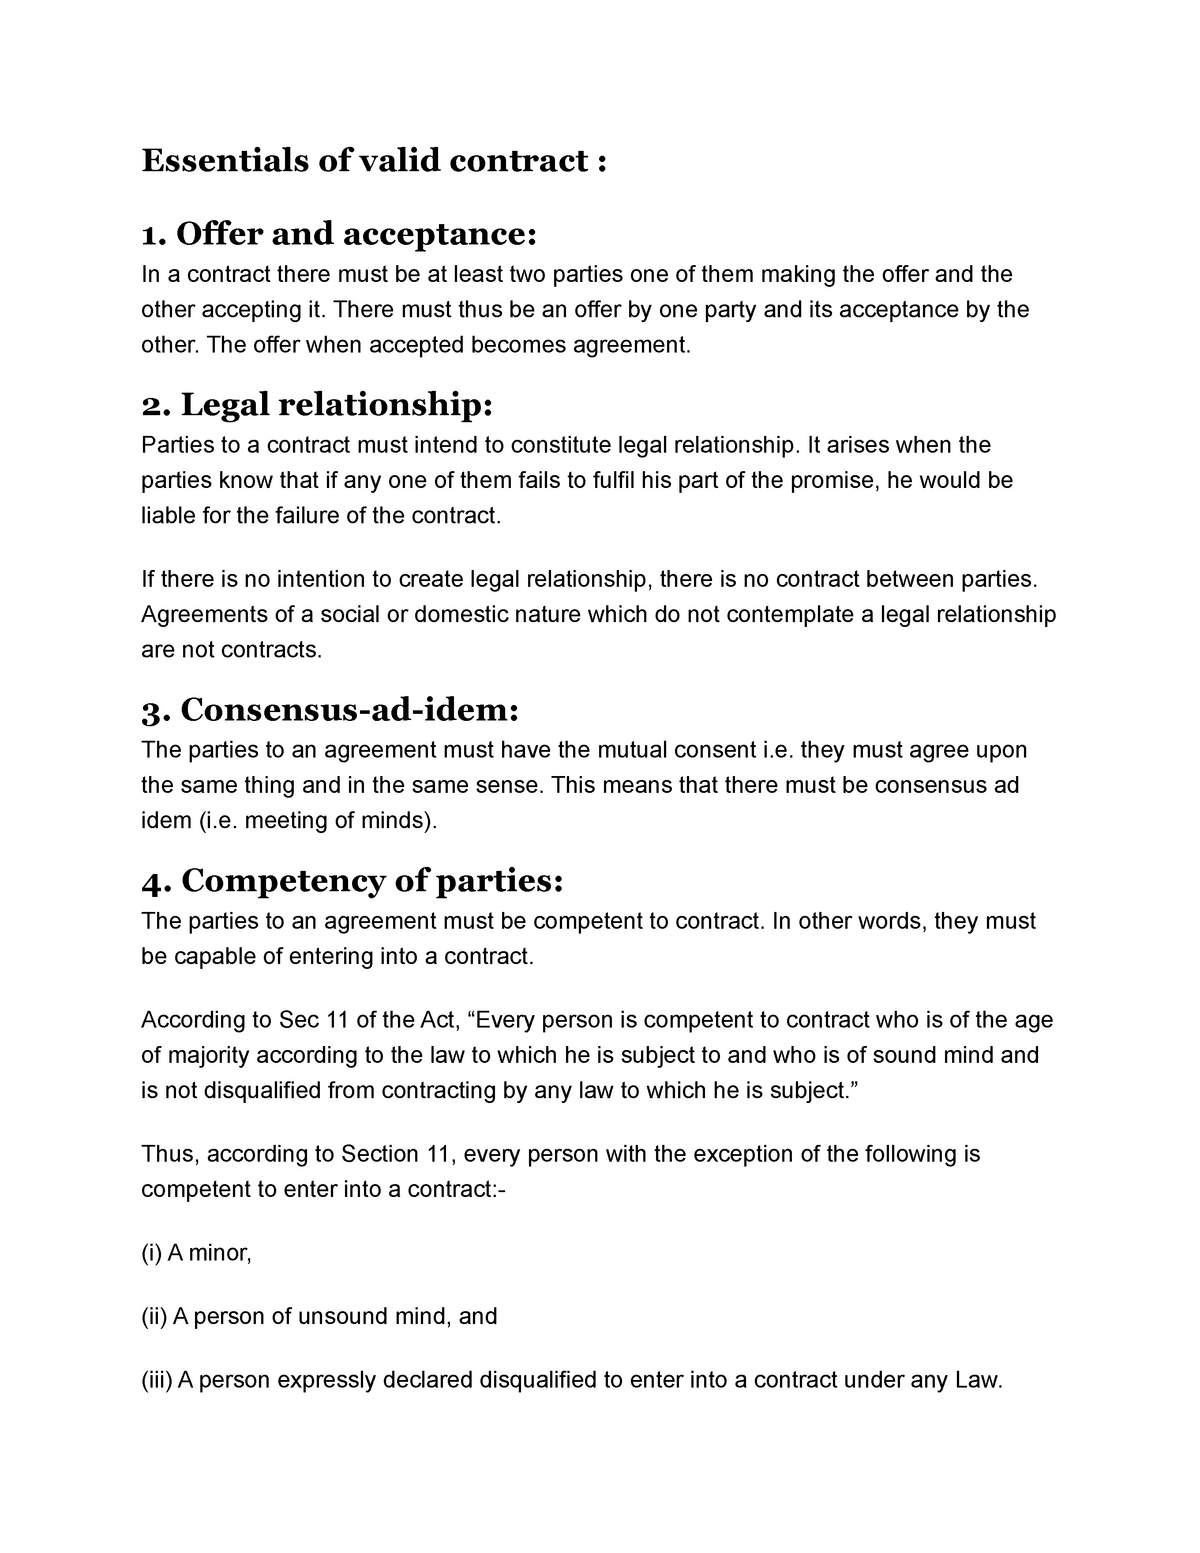 essentials-of-valid-contract-contract-1-llb-essentials-of-valid